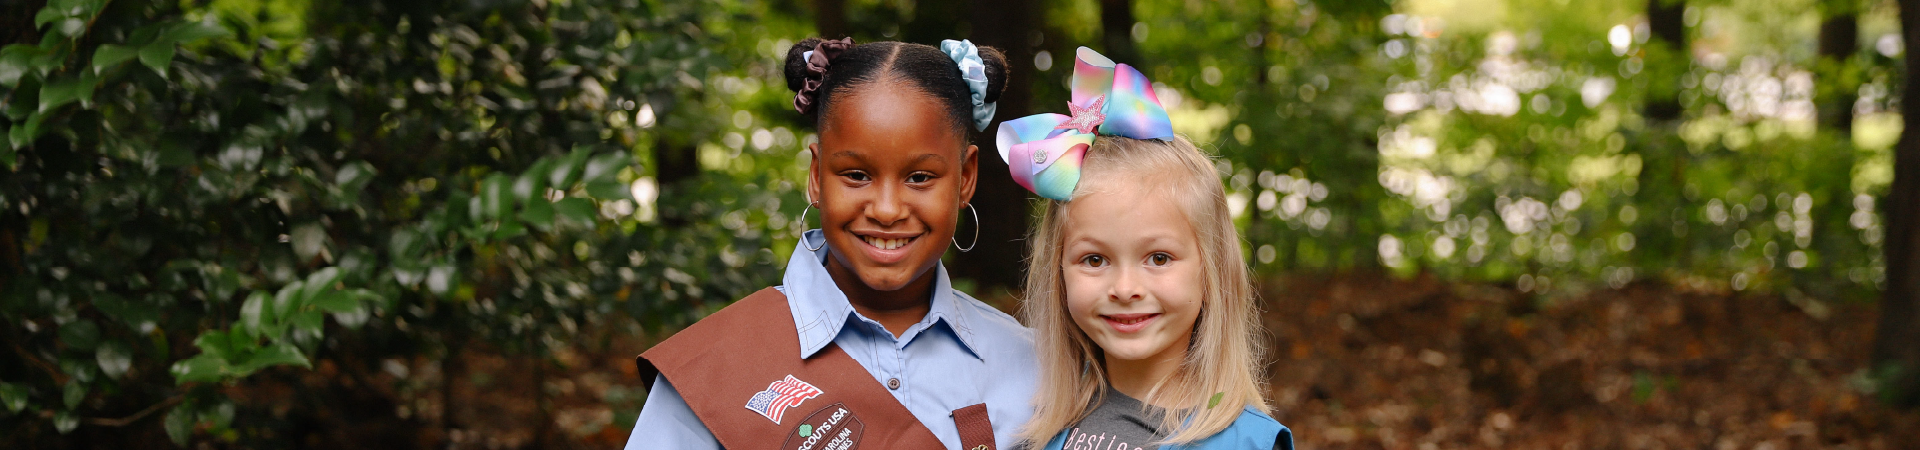  two girl scouts wearing uniforms smile 